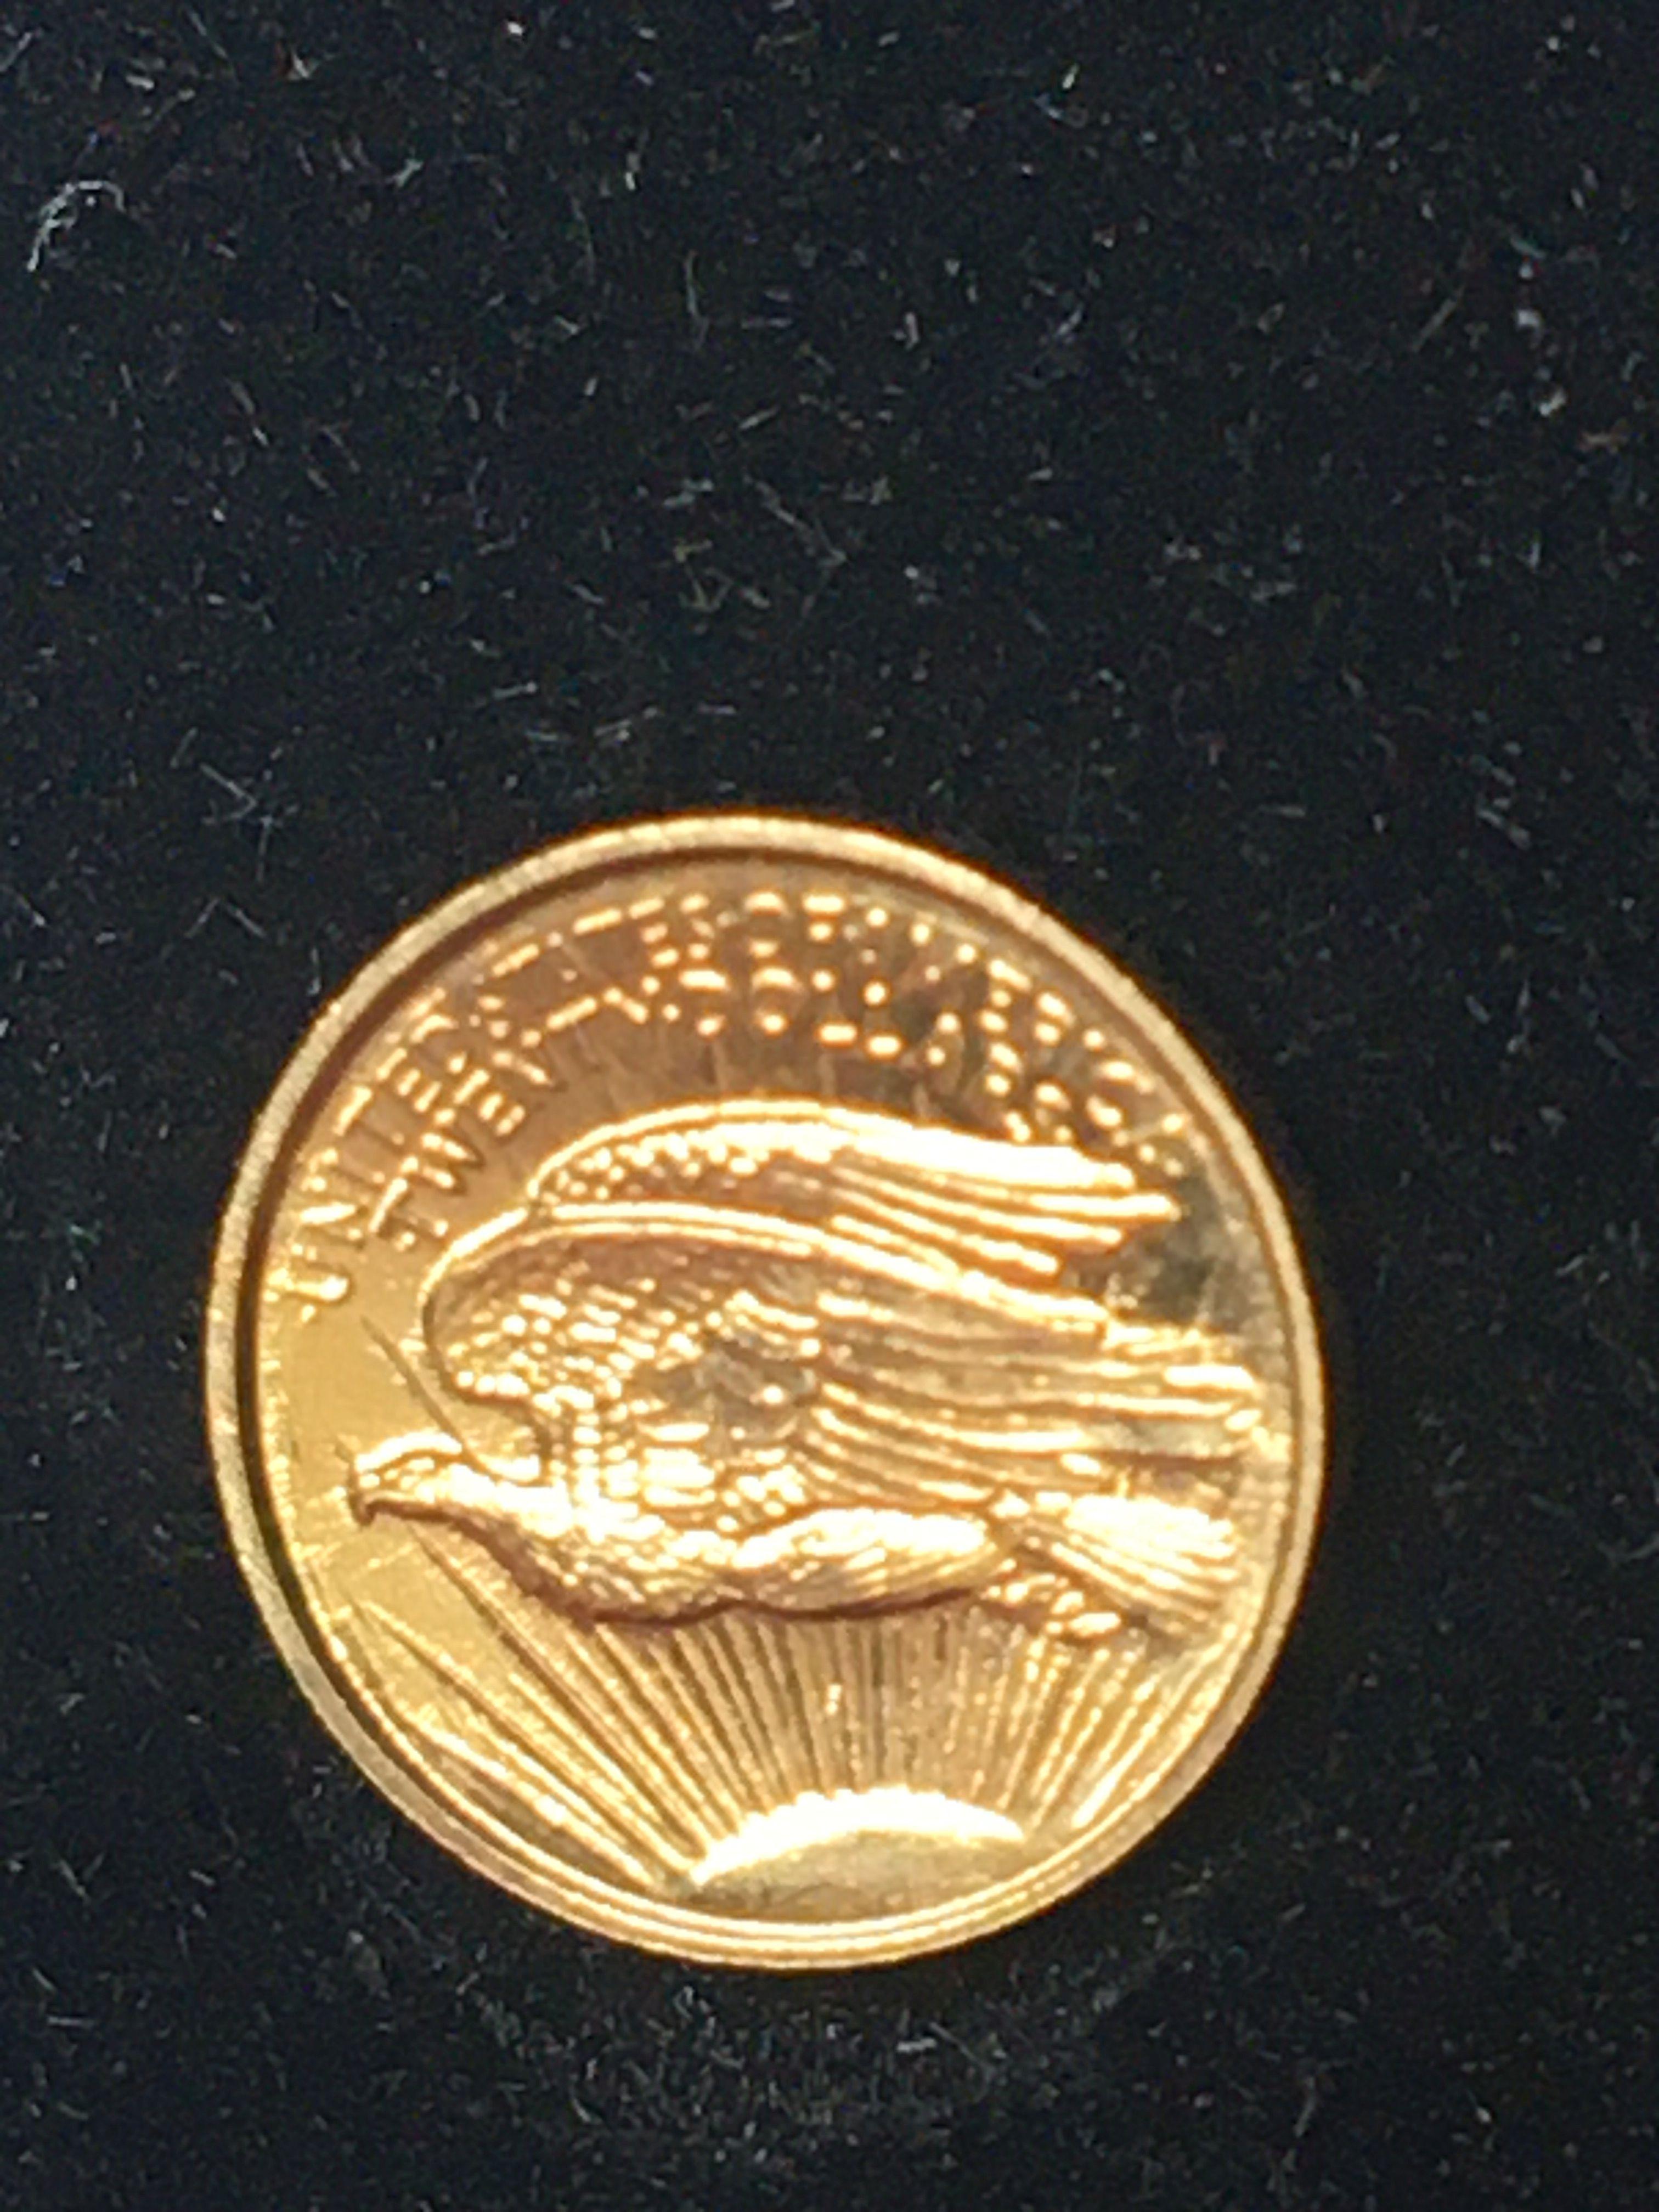 14kt Gold American Jewelry Coin.53 Grams Solid 14kt Gold